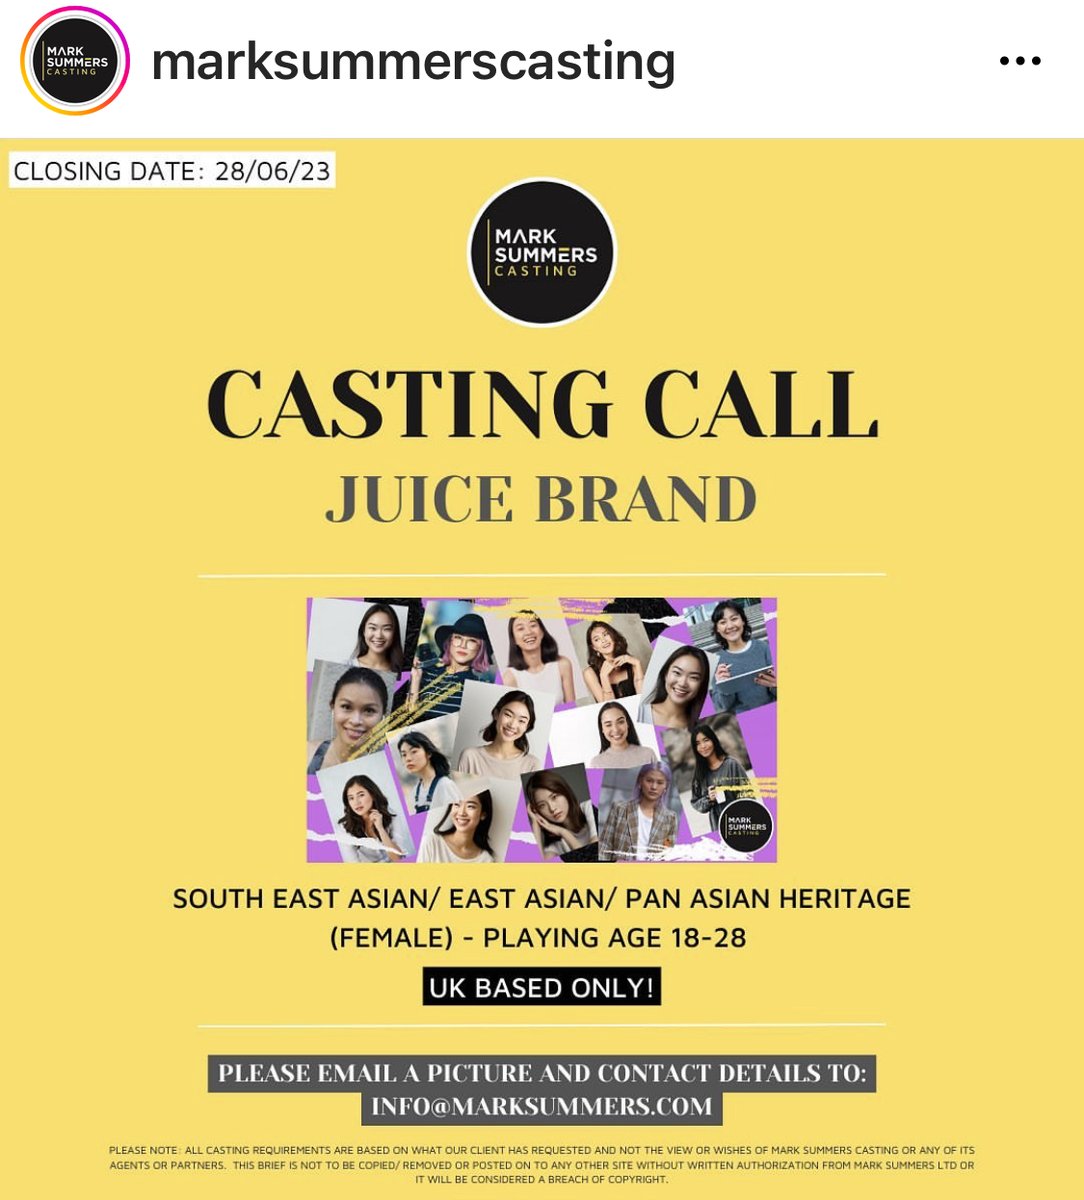 New #castingcall for a commercial amazing fees to artists who book ! Casting for #SoutheastAsian #eastasian #panasian  casting suggestions from UK & EU email pics & info info@marksummers.com please share RT  #Diversitycasting #castingdirector #marksummerscasting #globalcasting